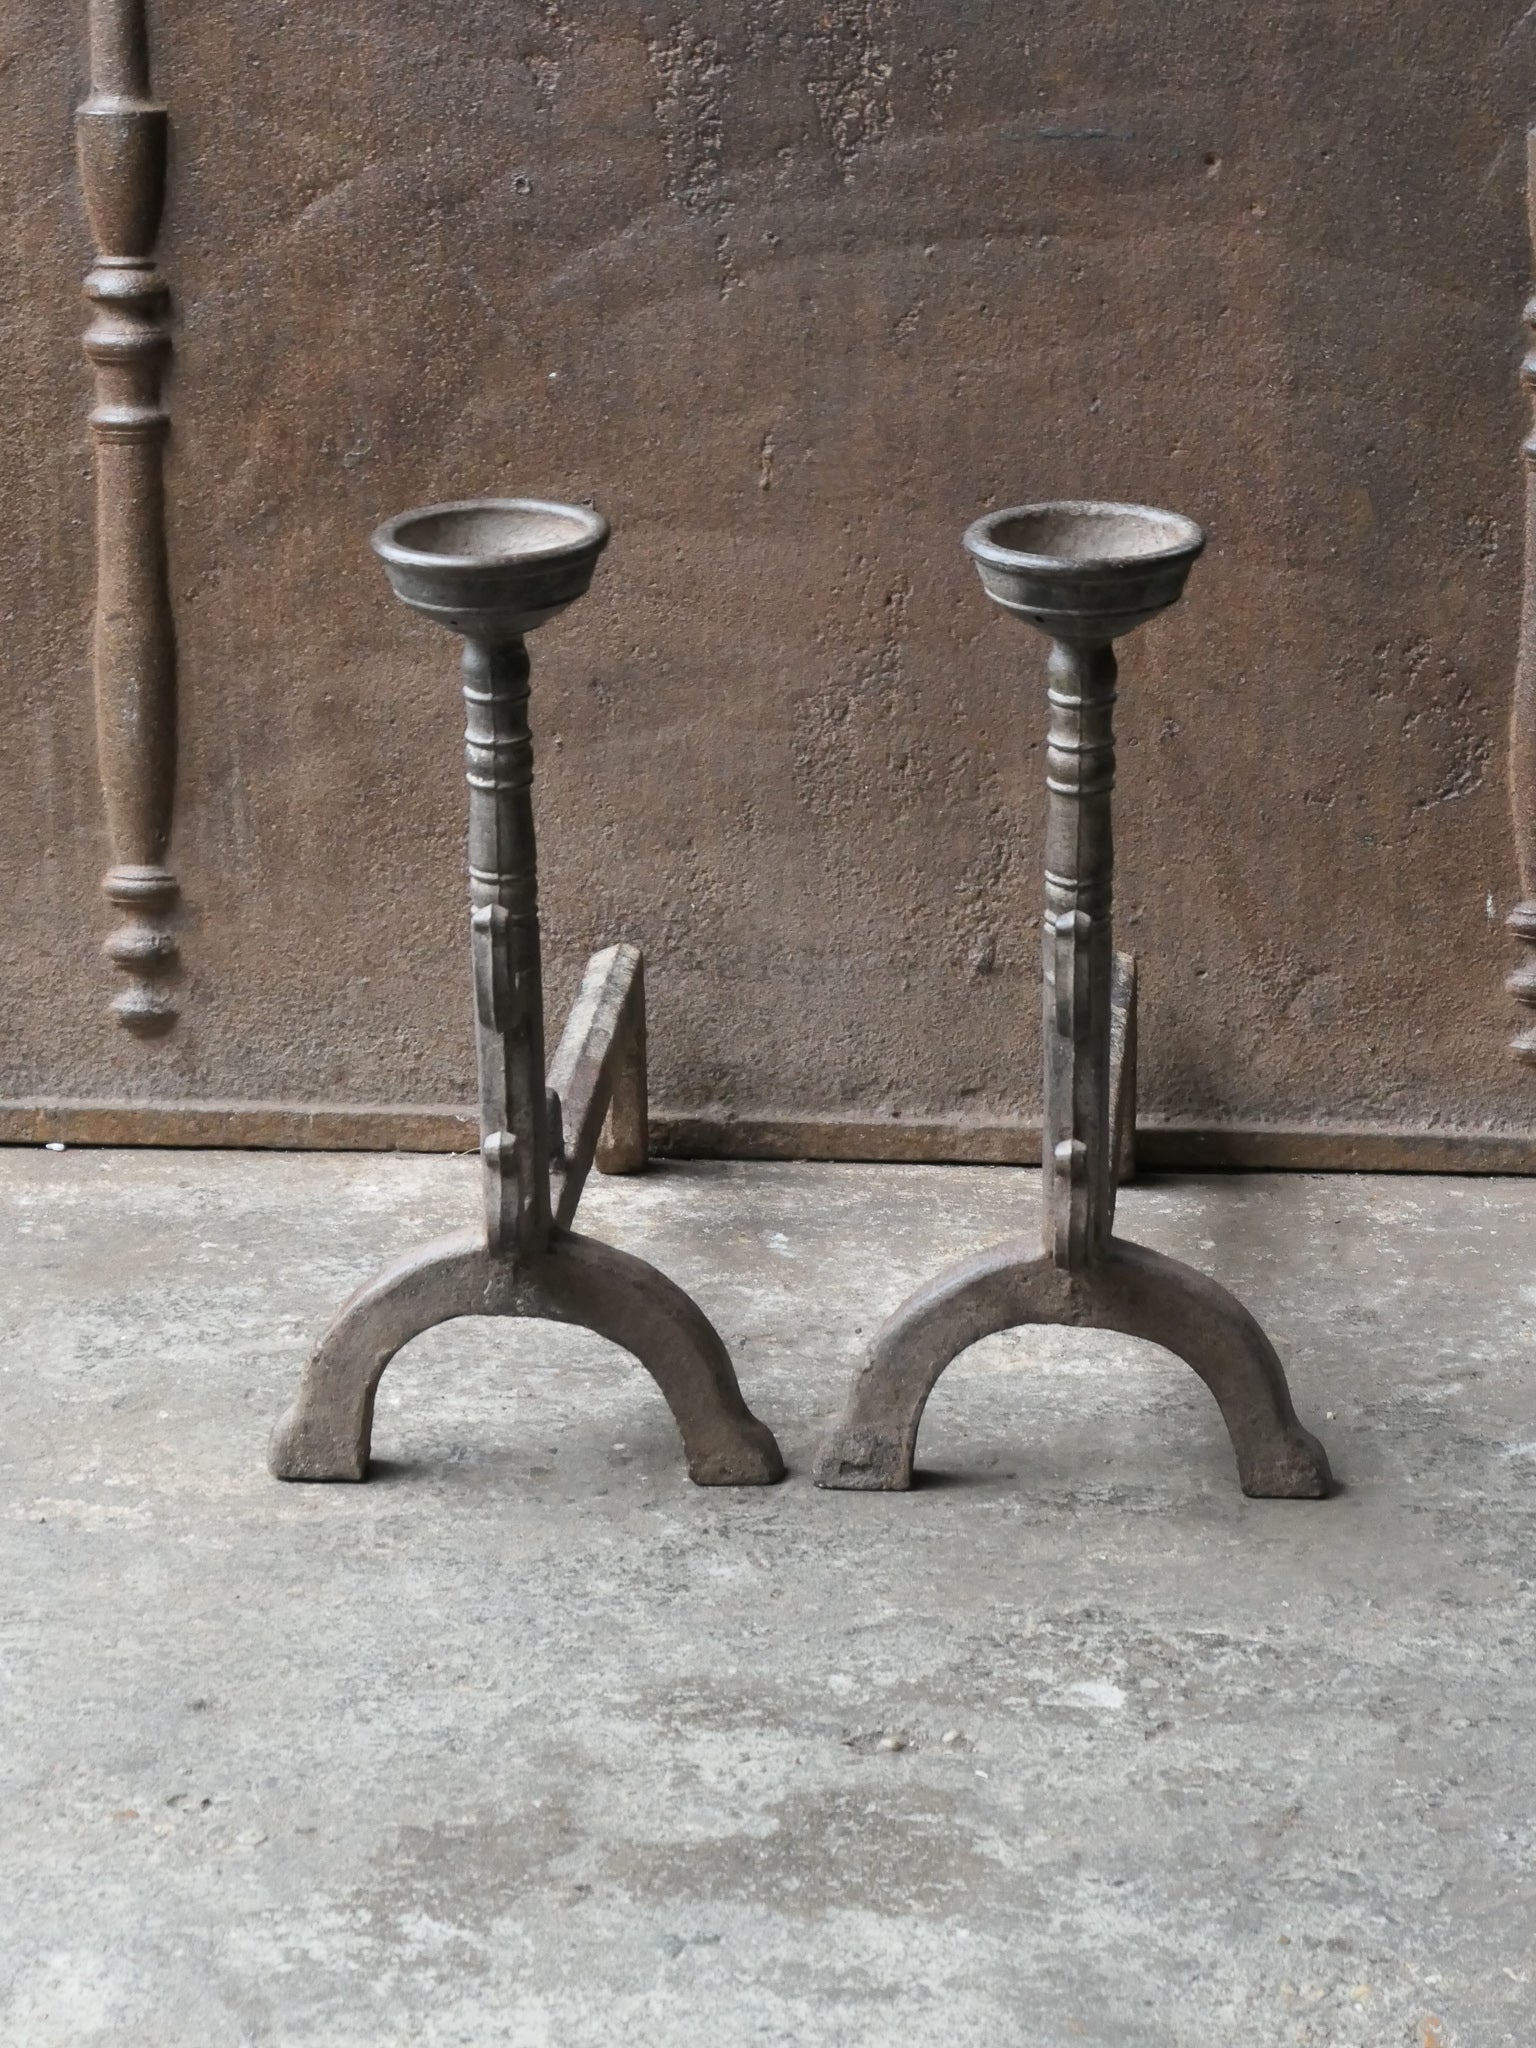 20th century French andirons made of cast iron. The style of the andirons is Gothic. The andirons have spit hooks to grill food and a cup to keep drinks warm. They are in a good condition.